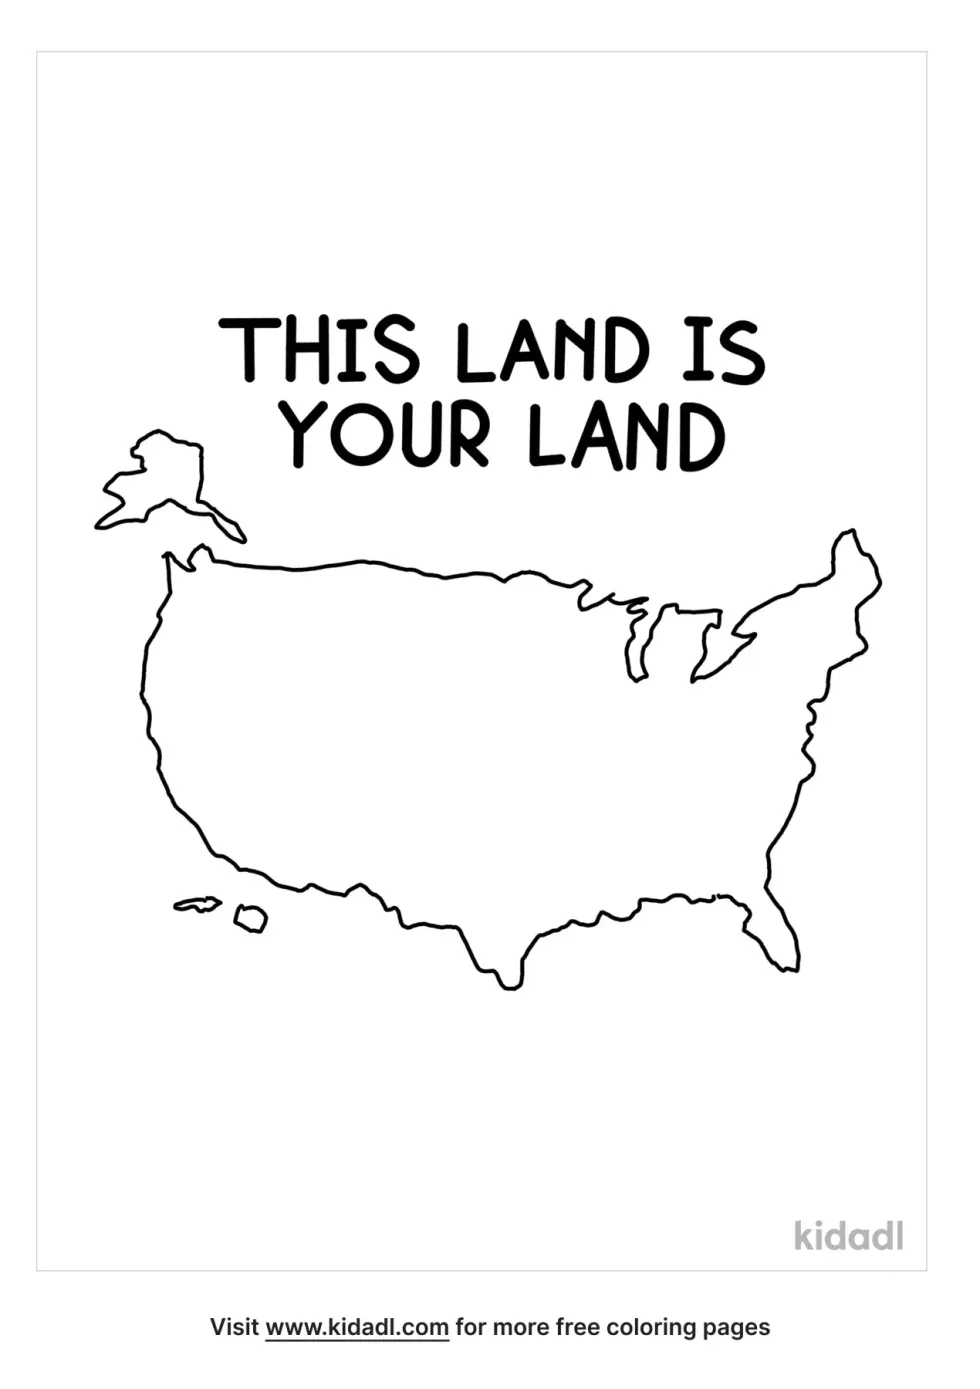 This Land Is Your Land Coloring Page